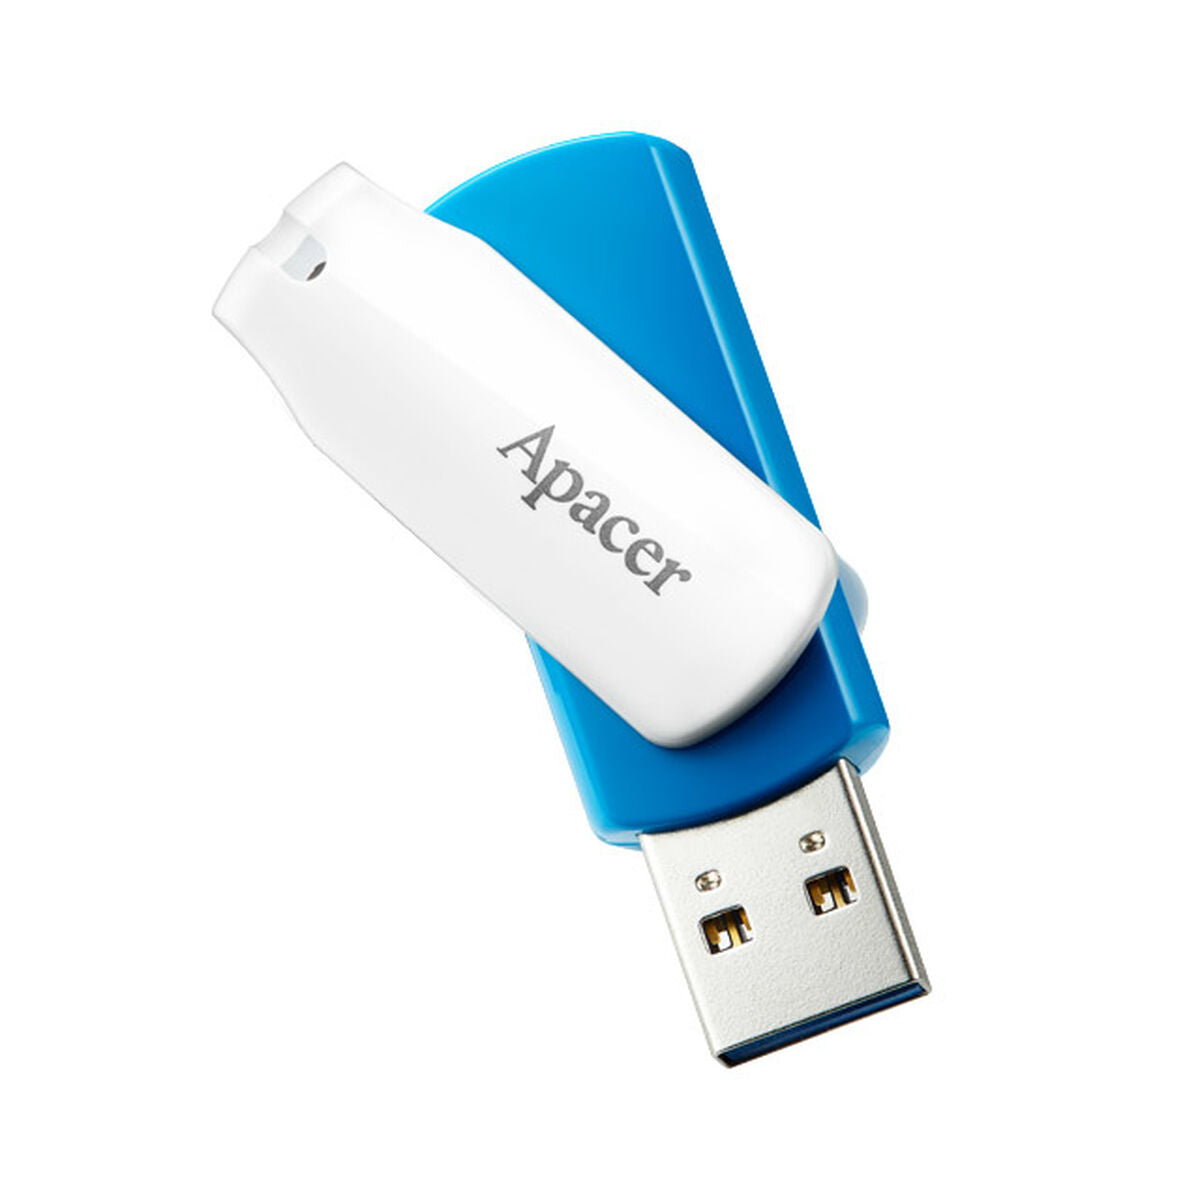 USB stick Apacer AH357 64 GB, Apacer, Computing, Data storage, usb-stick-apacer-ah357-64-gb, Brand_Apacer, category-reference-2609, category-reference-2803, category-reference-2817, category-reference-t-19685, category-reference-t-19909, category-reference-t-21355, category-reference-t-25636, computers / components, Condition_NEW, Price_20 - 50, Teleworking, RiotNook